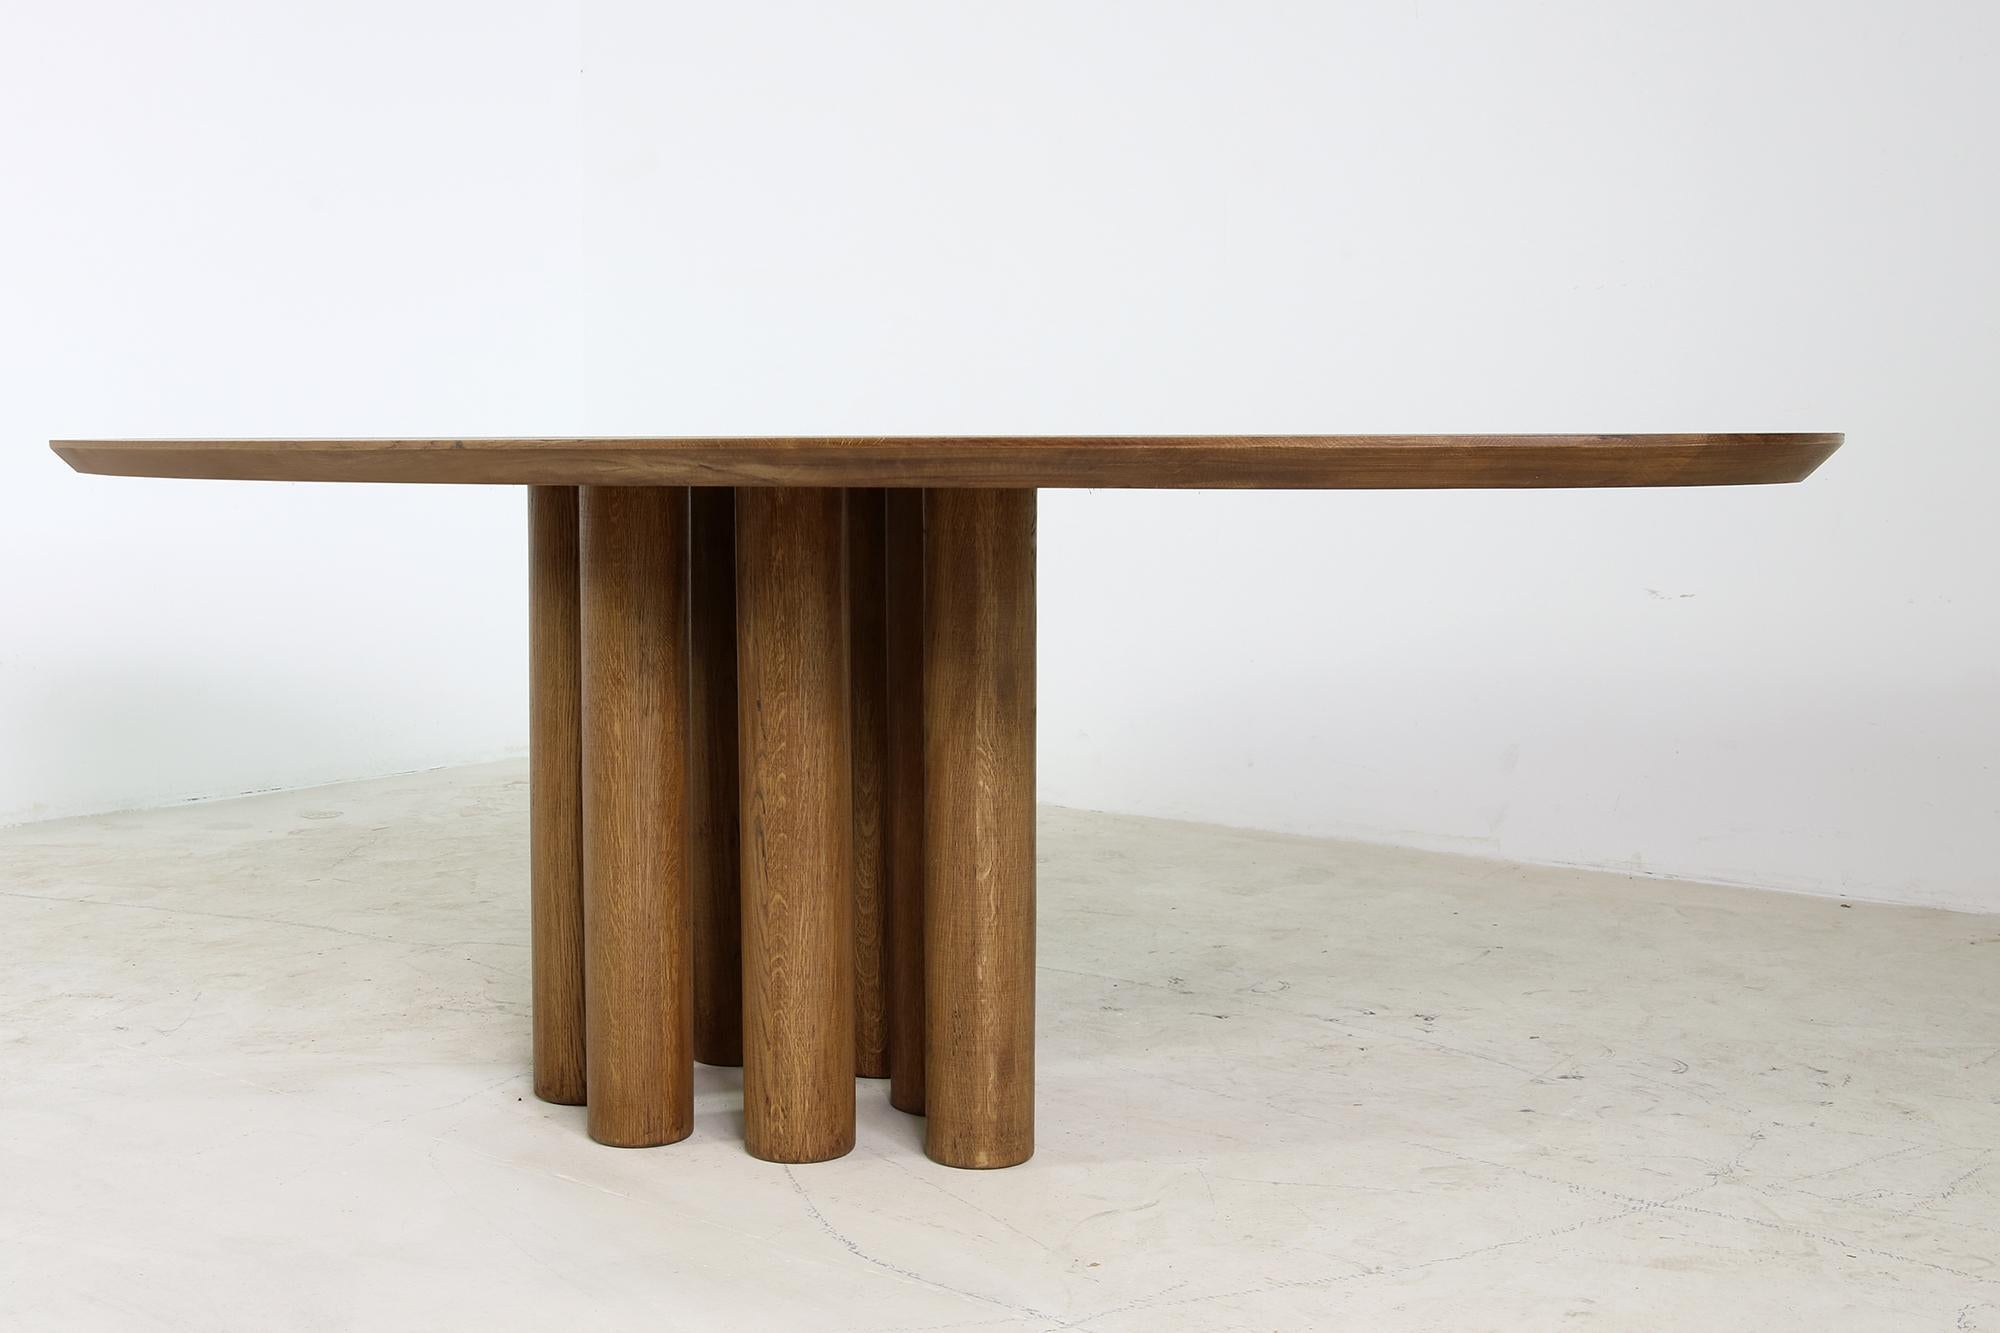 Beautiful contemporary Nathan Lindberg table, heavyweight. This piece can be used as a dining table for 6-10 persons, or as a conference table, or even a large free standing desk.
Beautiful oval, elliptical shape, solid oak base. The solid oak table